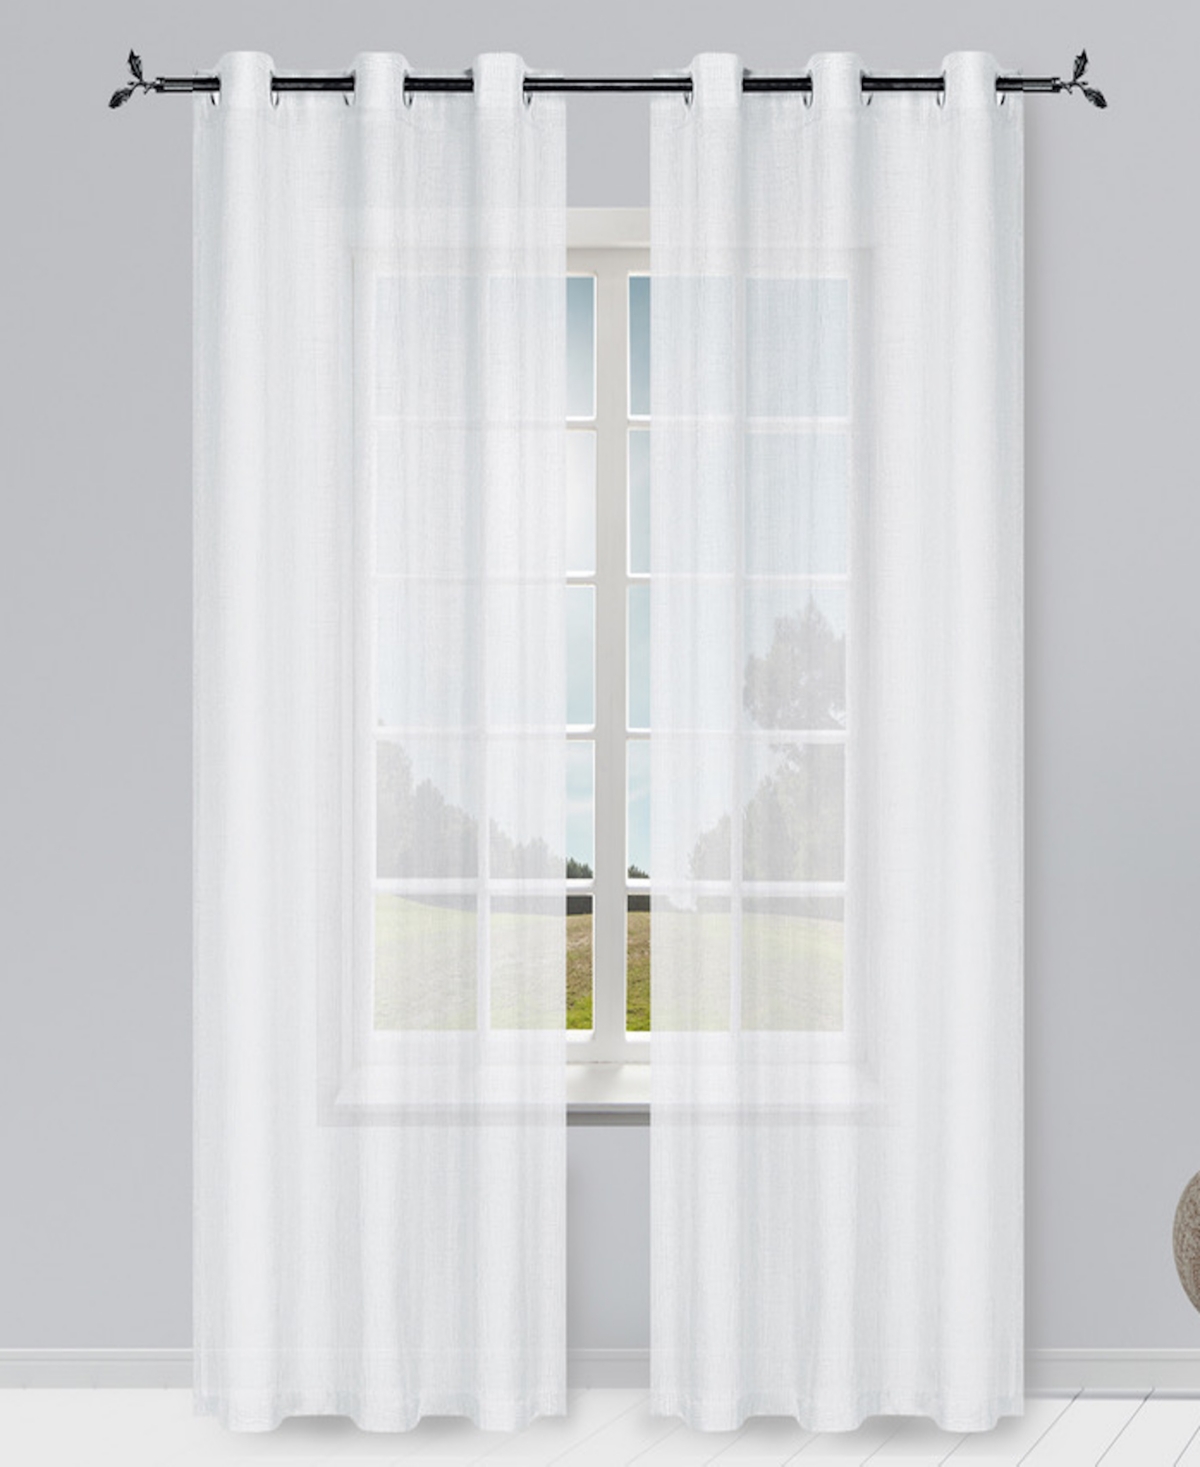 Solid Semi-Sheer 76" x 96" Grommet Curtain Panel, Set of 2 - White